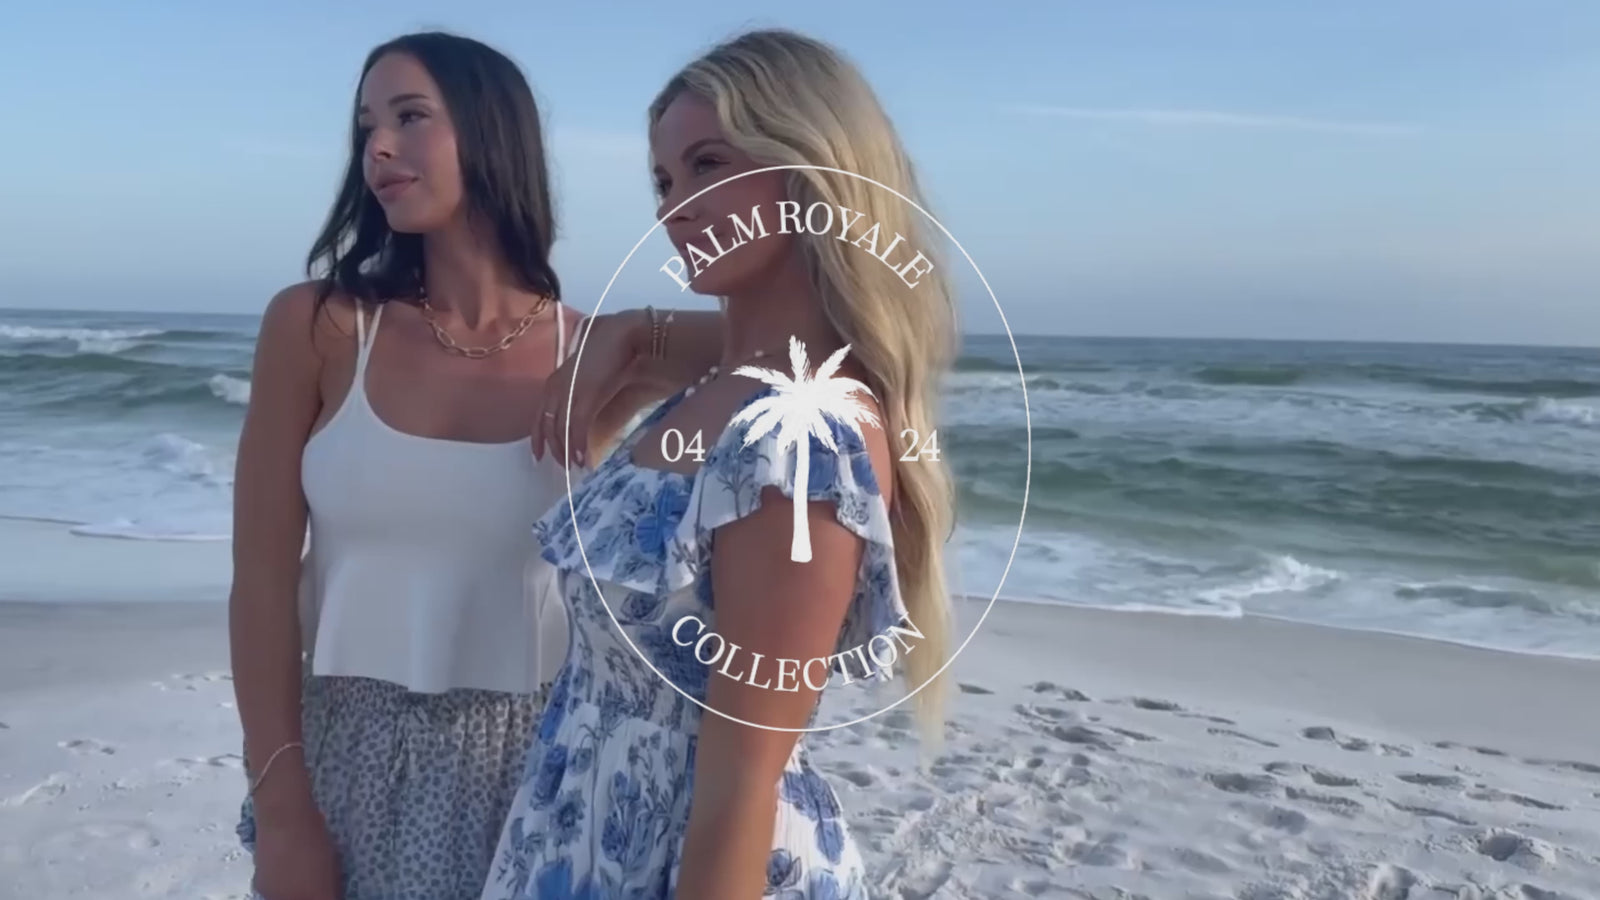 video of 2 girls in dresses on the beach by the ocean - palm royale collcetion shop now